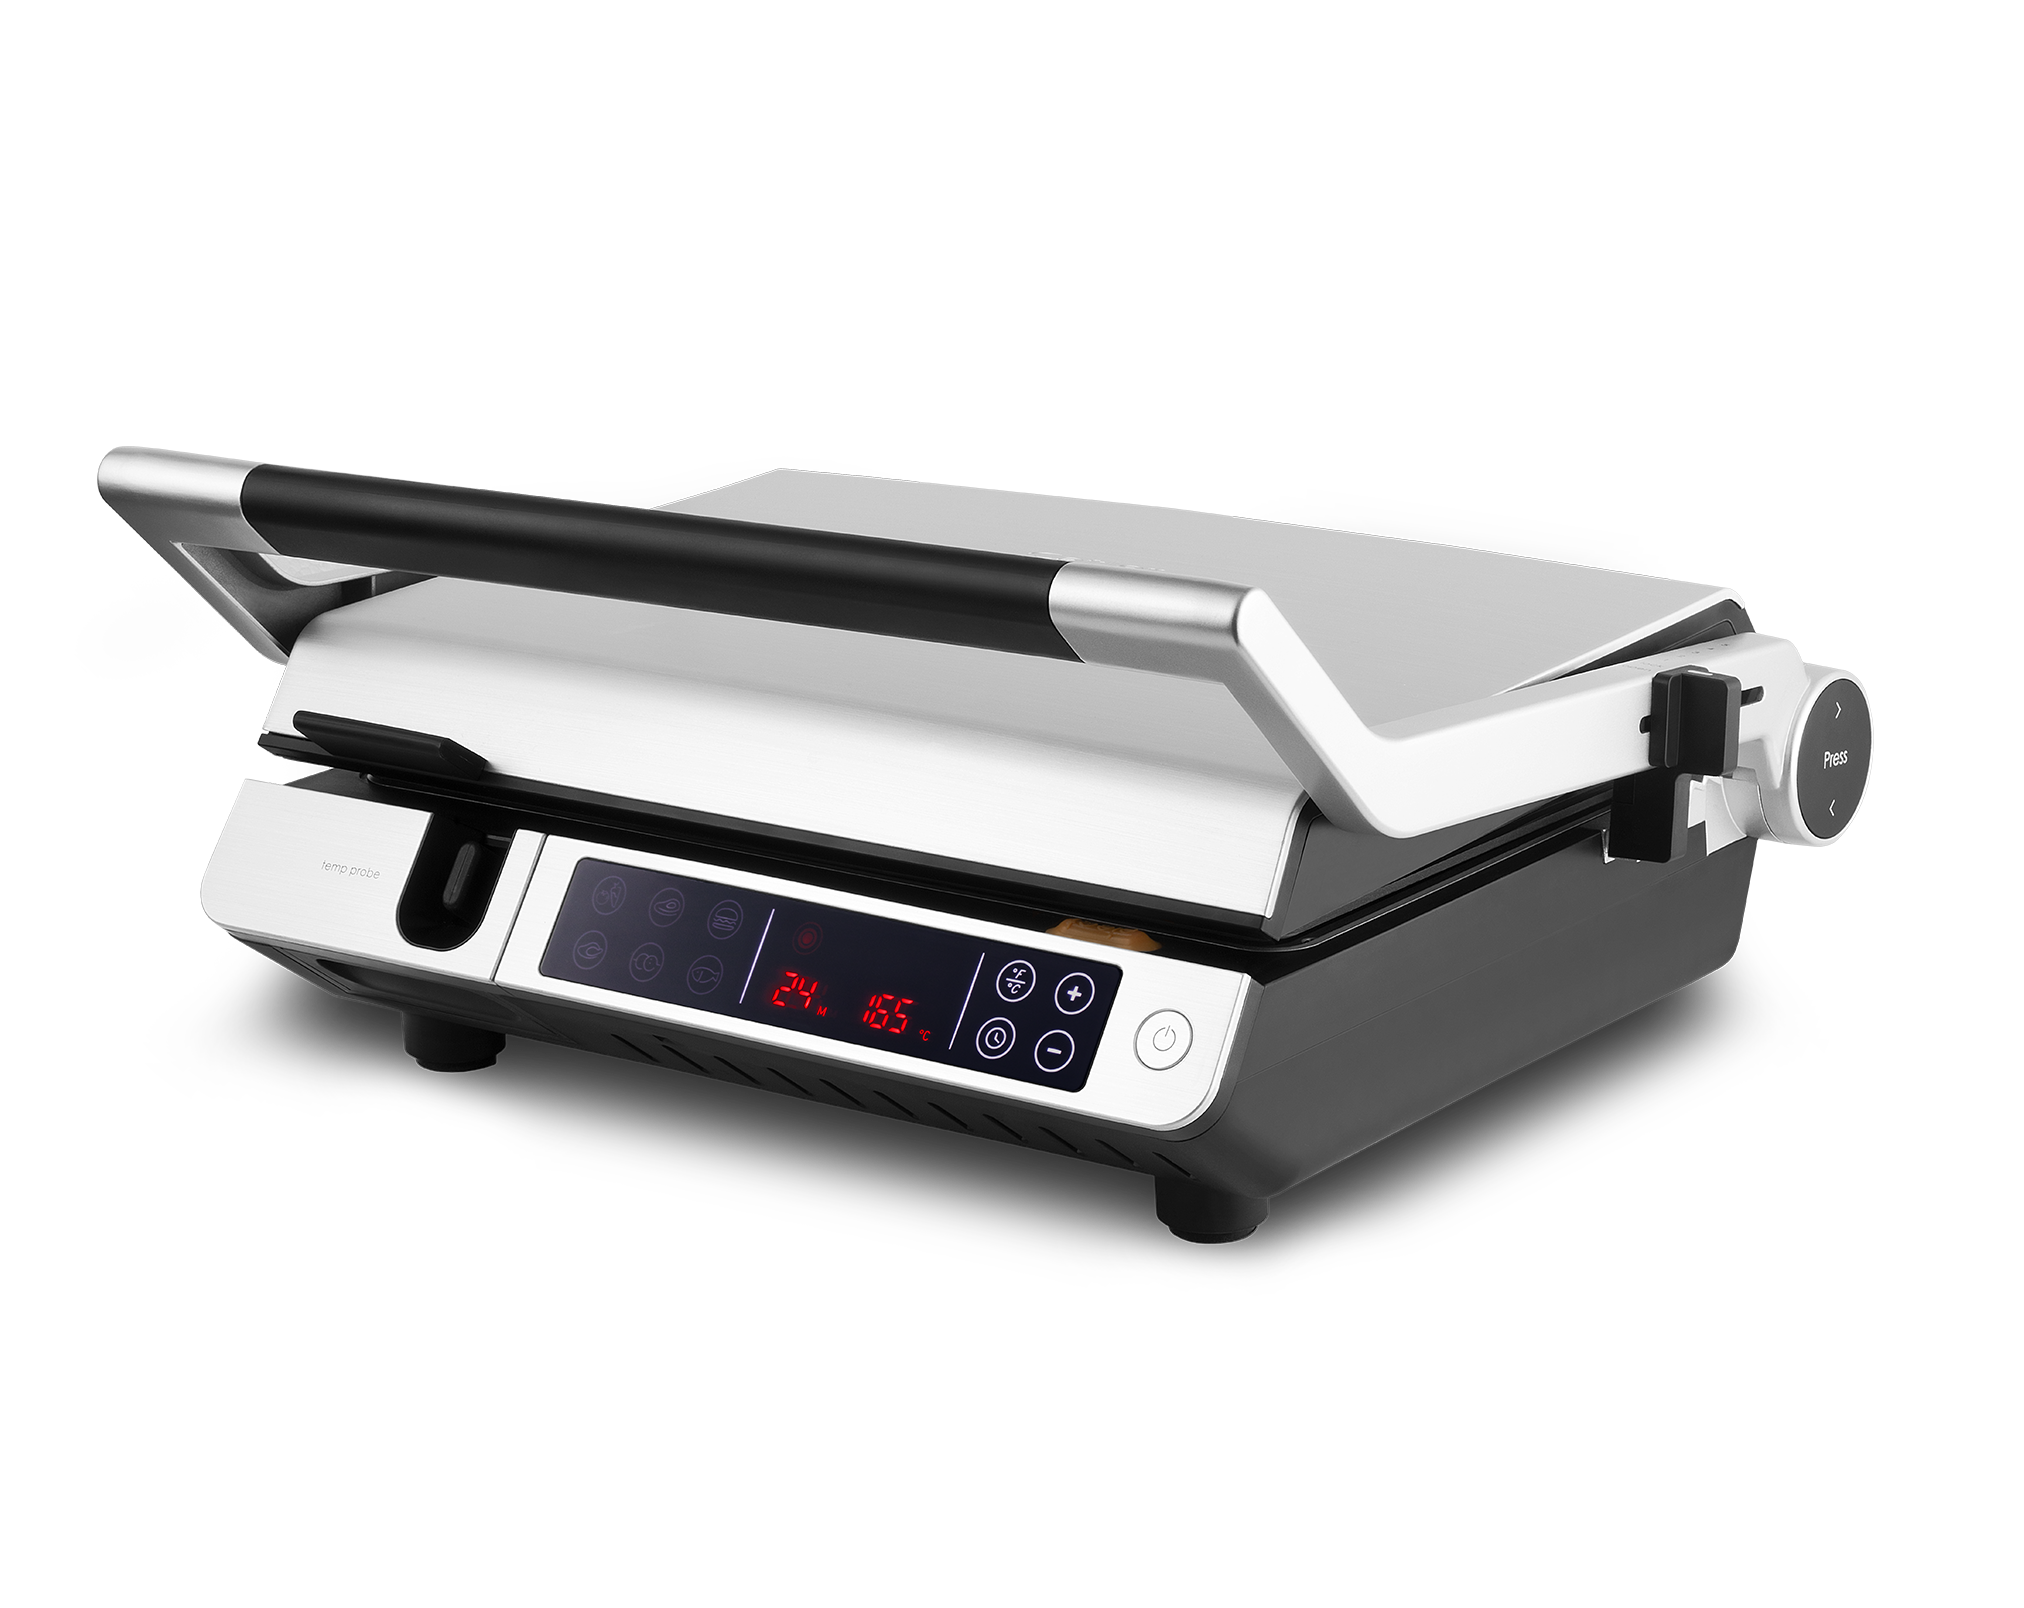 Smart 2-in-1 grill with temperature probe | GR 7010 | Catler